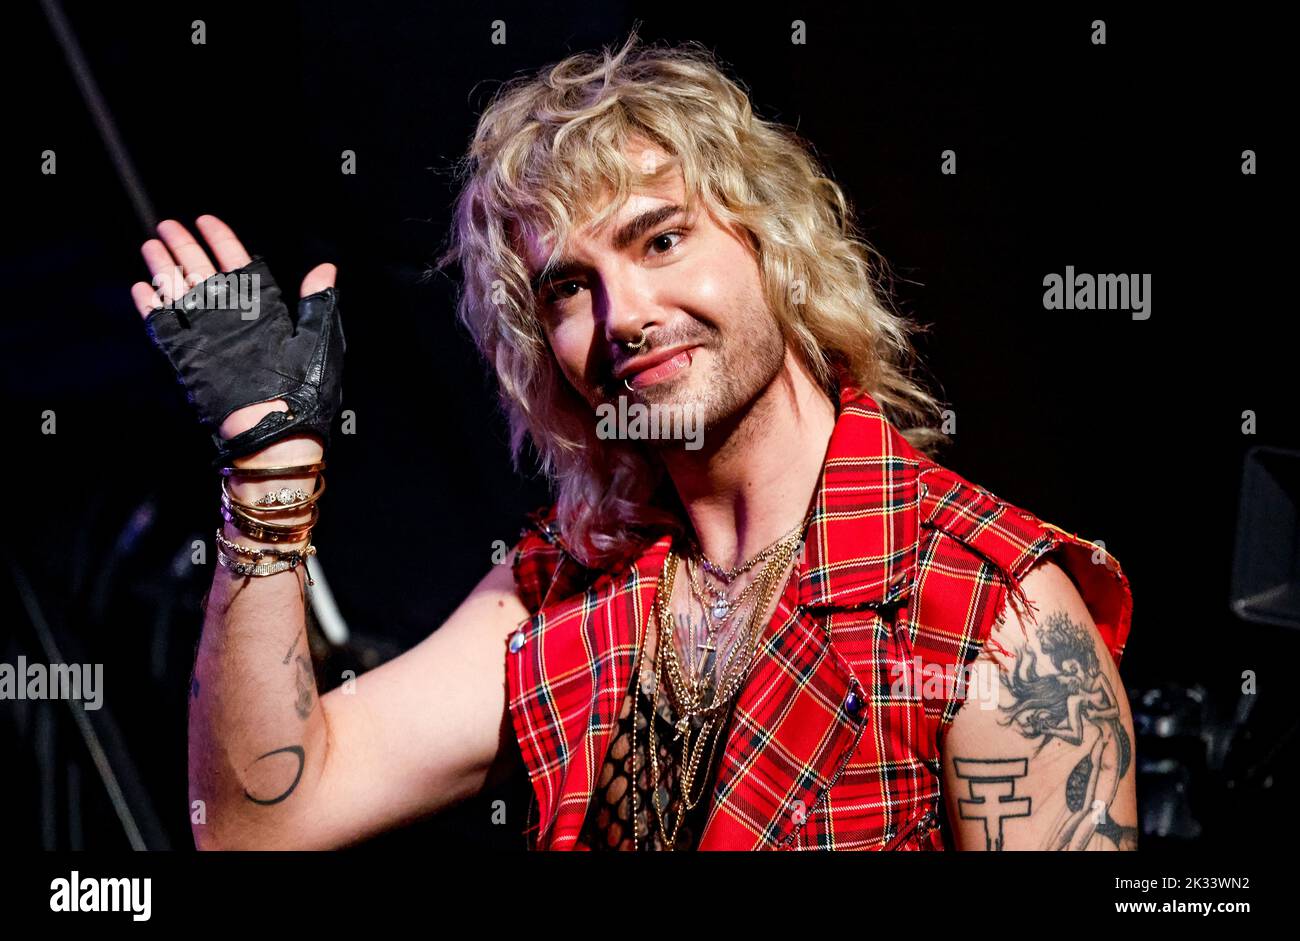 Hamburg, Germany. 24th Sep, 2022. Designer, musician and book author Bill Kaulitz is on stage at the presentation of the Anchor Award 2022 as part of the Reeperbahn Festival. The Reeperbahn Festival is a large club festival around Hamburg's Reeperbahn with concerts, visual arts, film and literature, promotion of young talent and a specialist conference for the music and digital industries. Credit: Axel Heimken/dpa/Alamy Live News Stock Photo